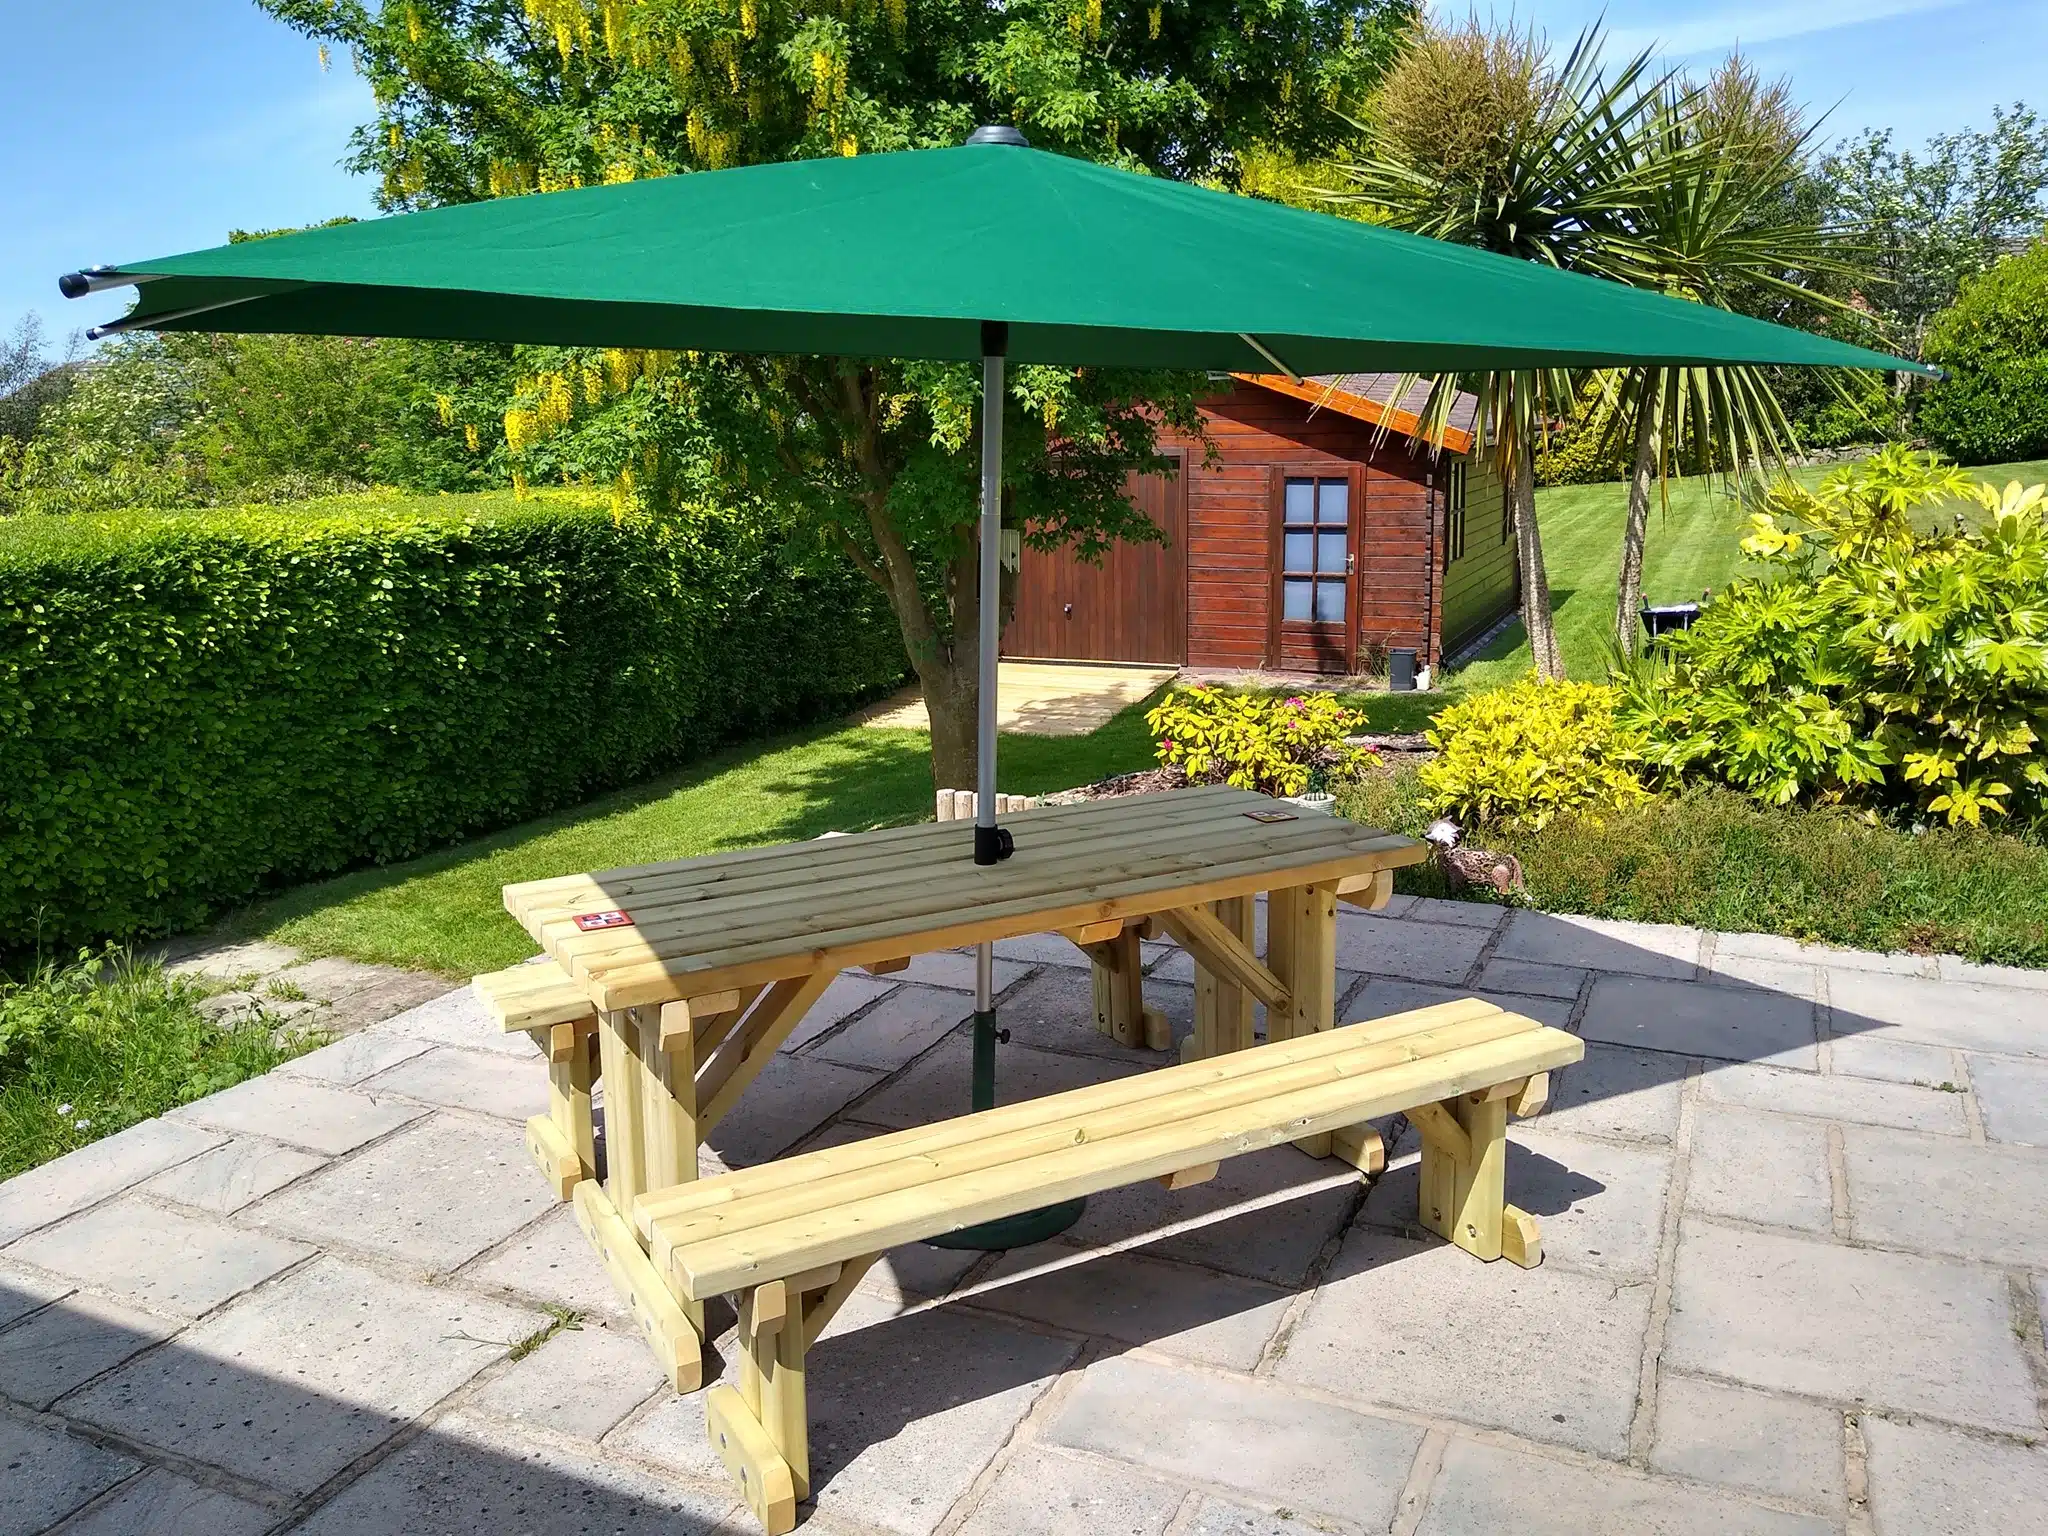 picnic bench with parasol in garden